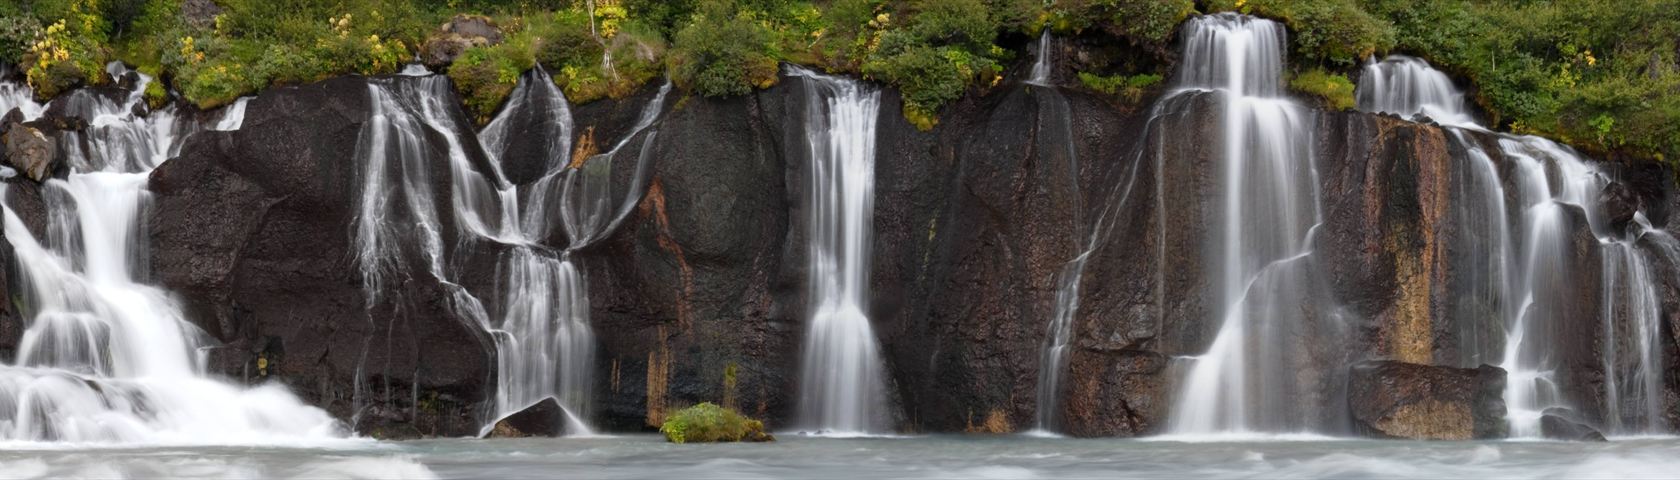 Water Cascading over the Rocks